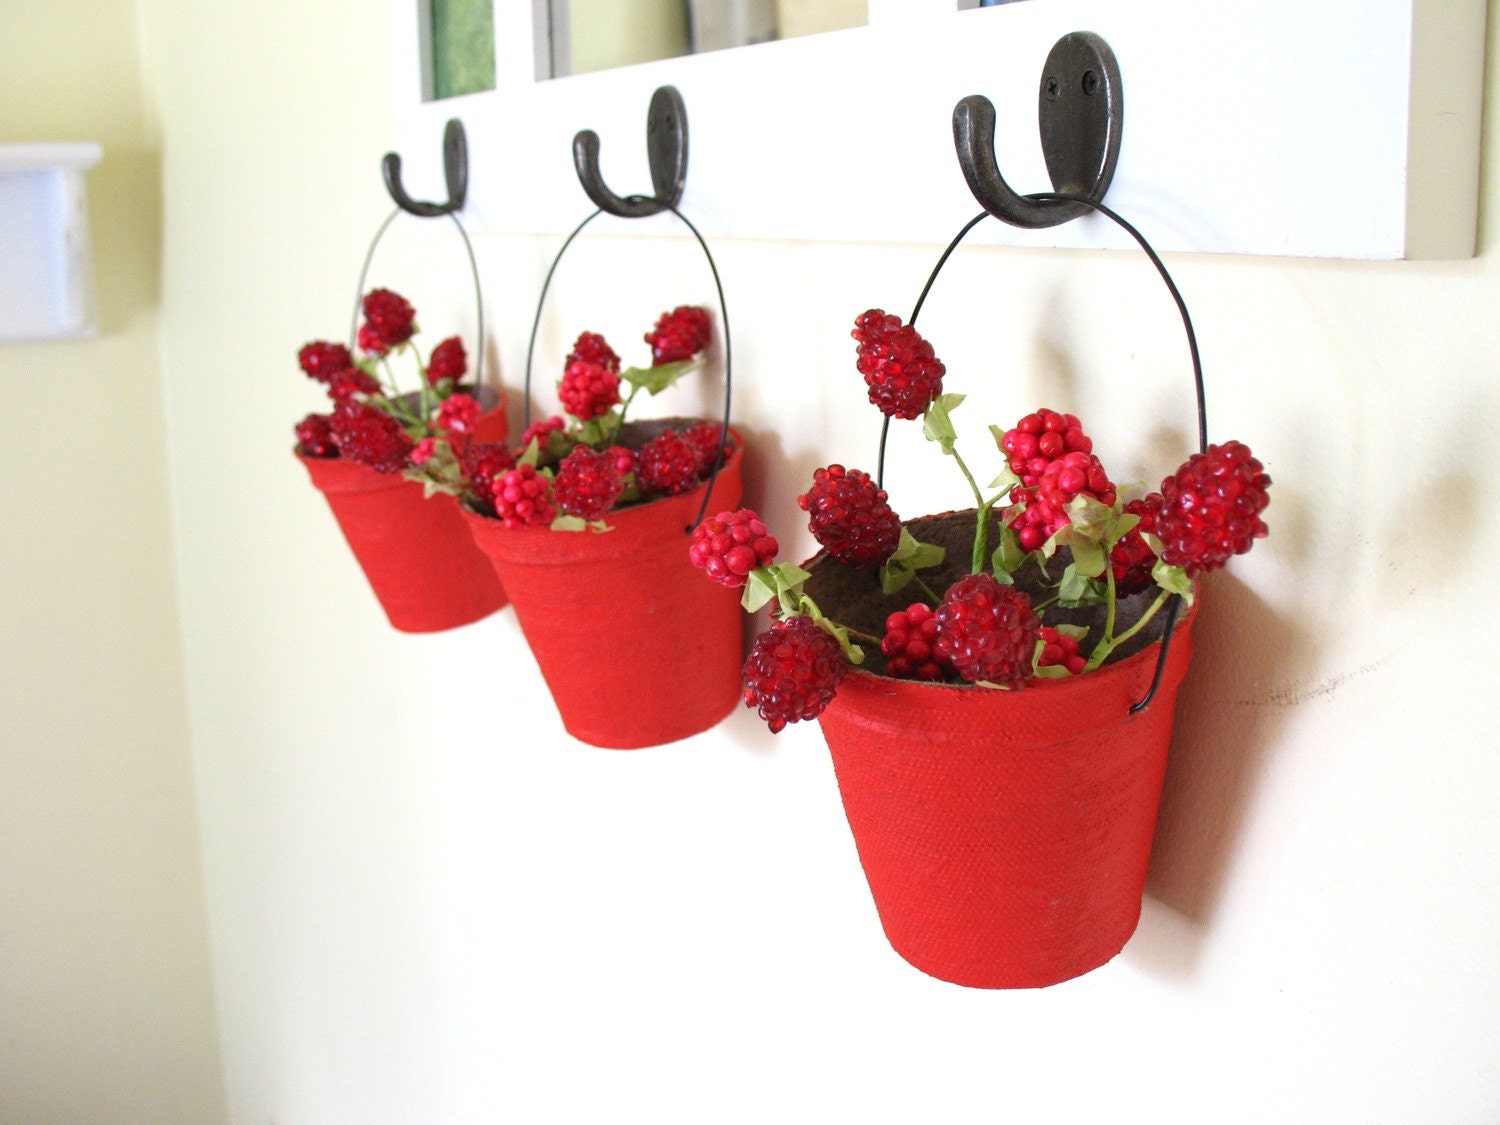 SALE .
 posy baskets in poppy red . four papier mache vintage-inspired candy 
containers